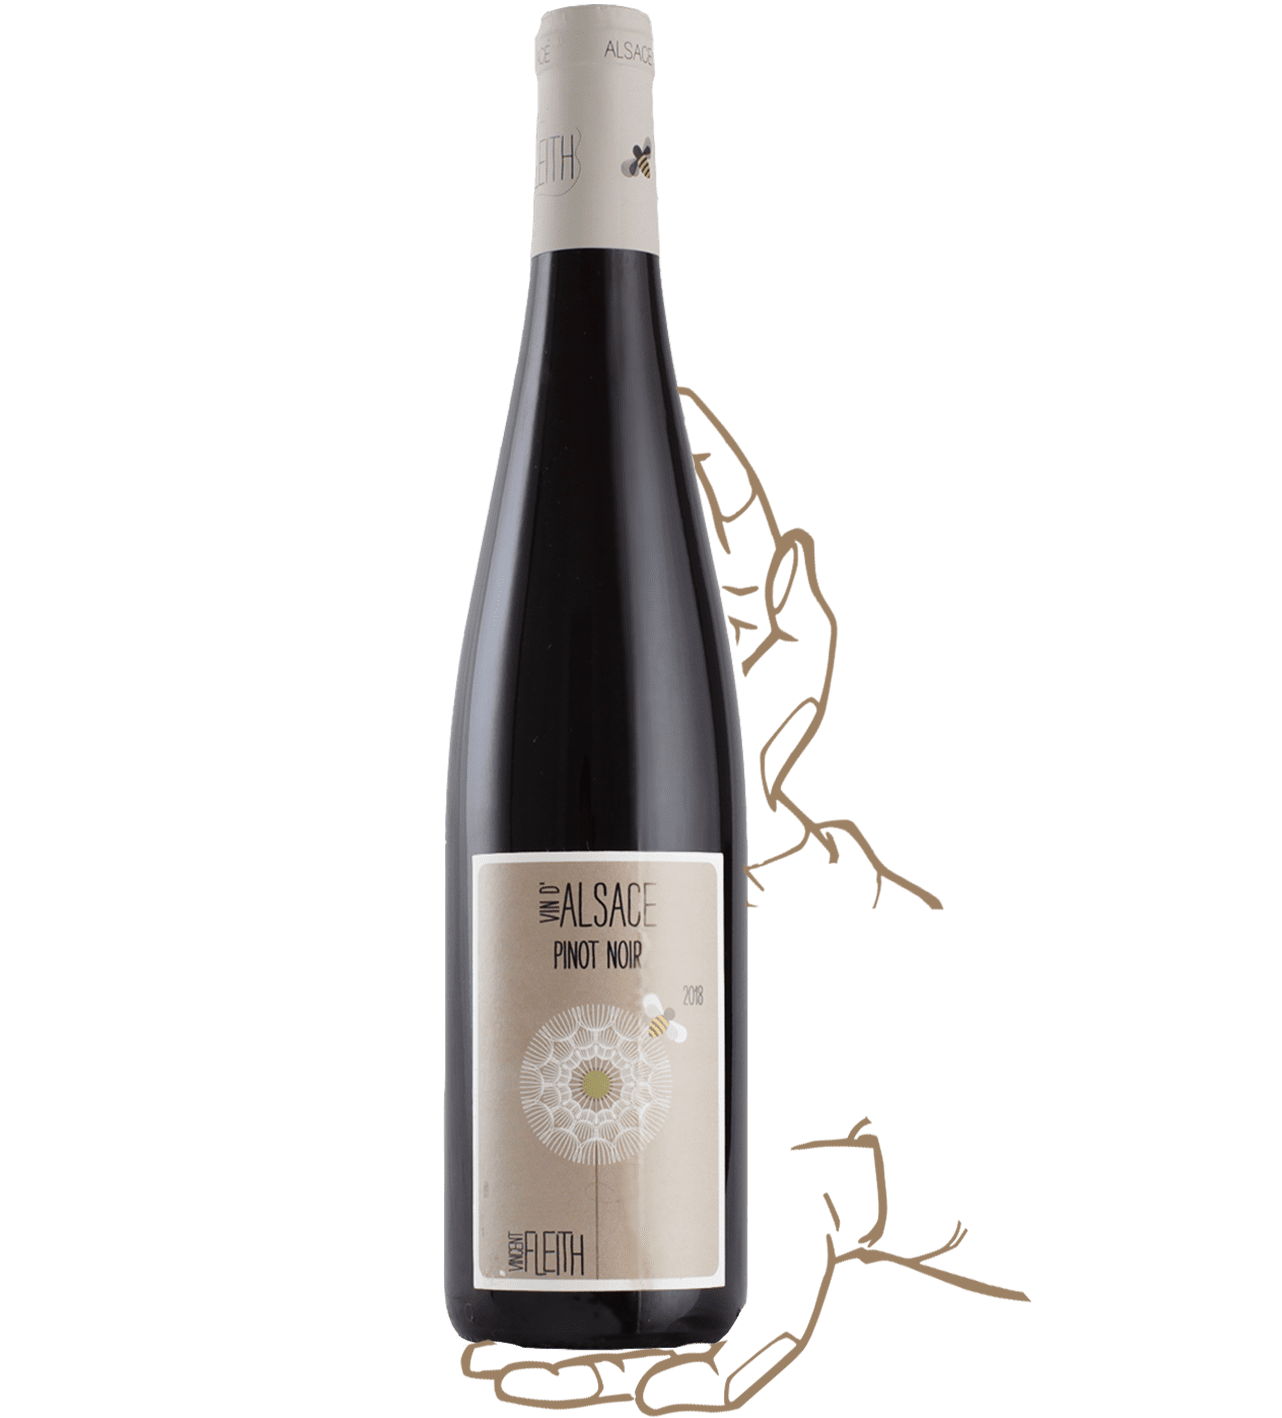 Pinot Noir by Vincent Fleith biodynamic red wine from d'Alsace